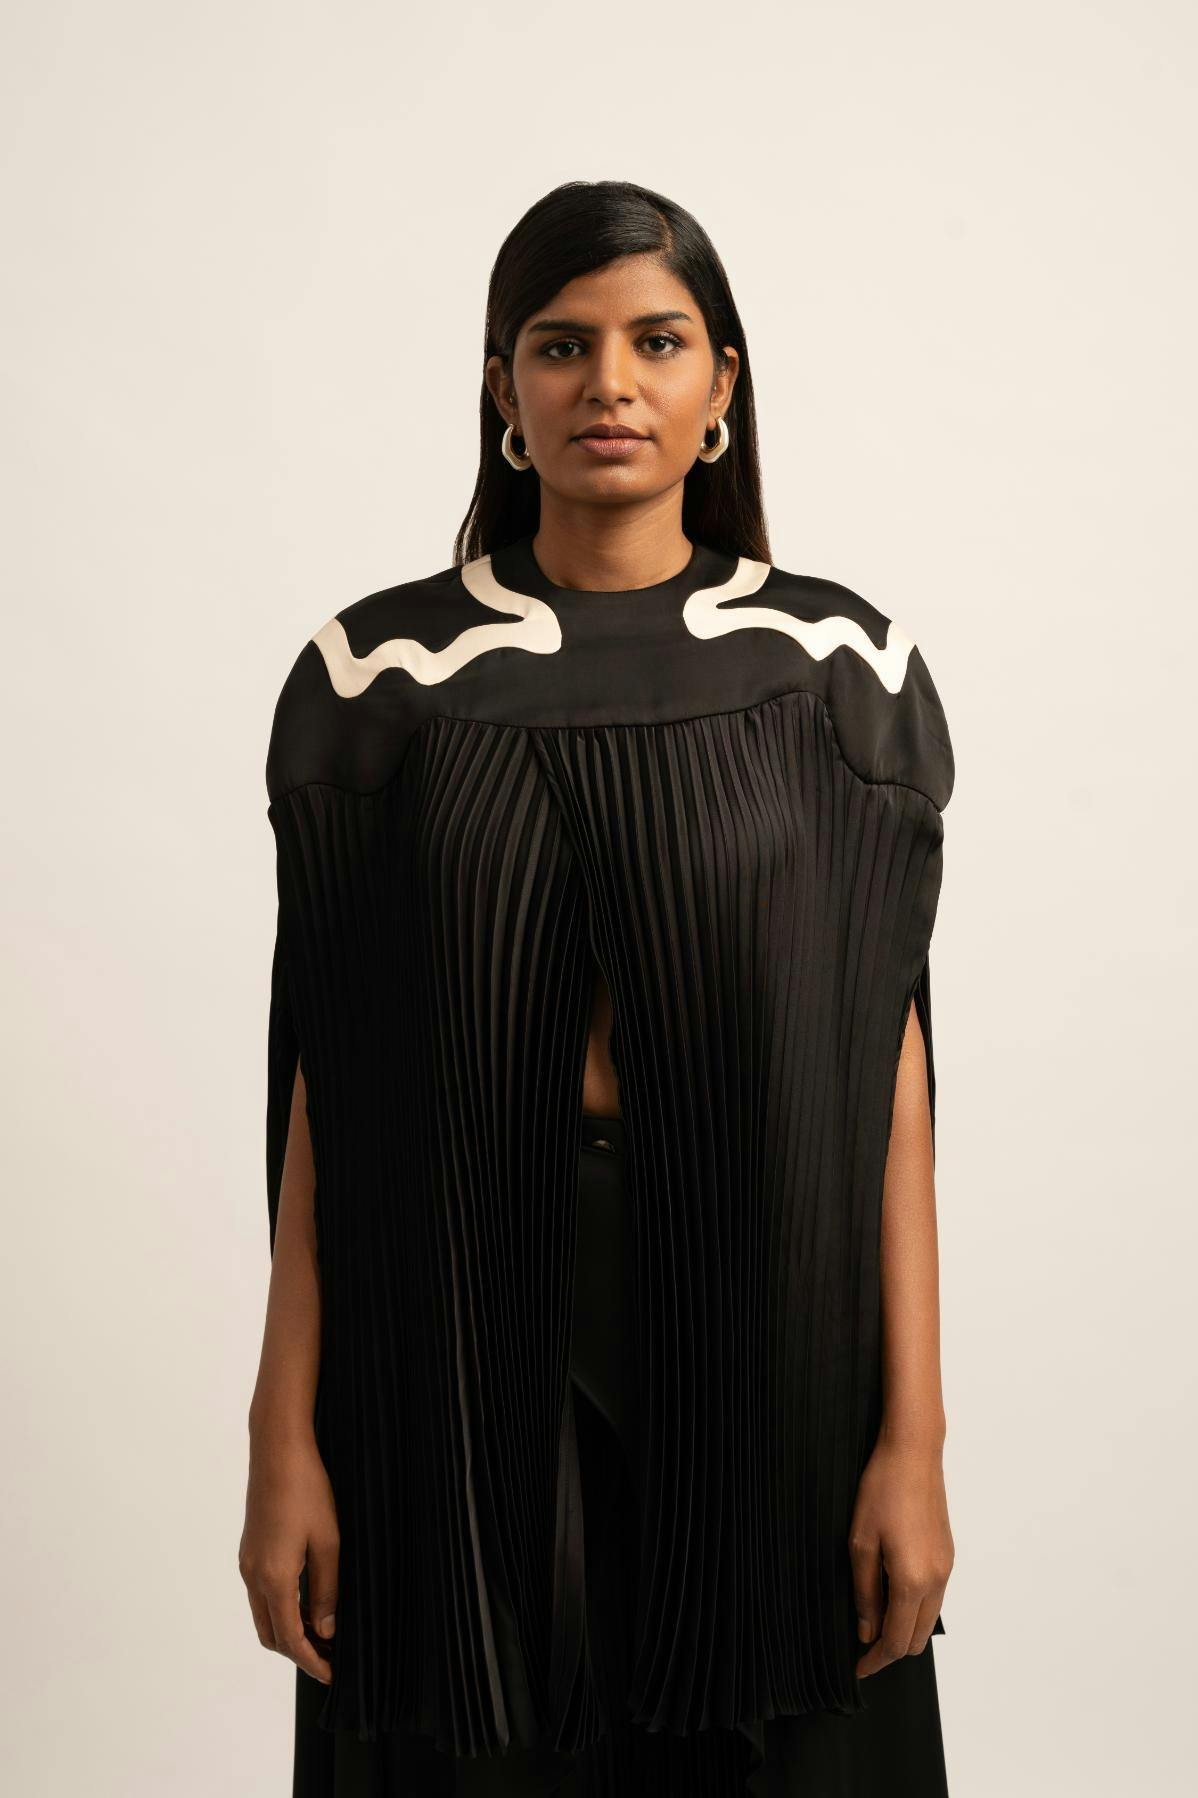 SWALLOWTAIL TOP, a product by Siddhant Agrawal Label